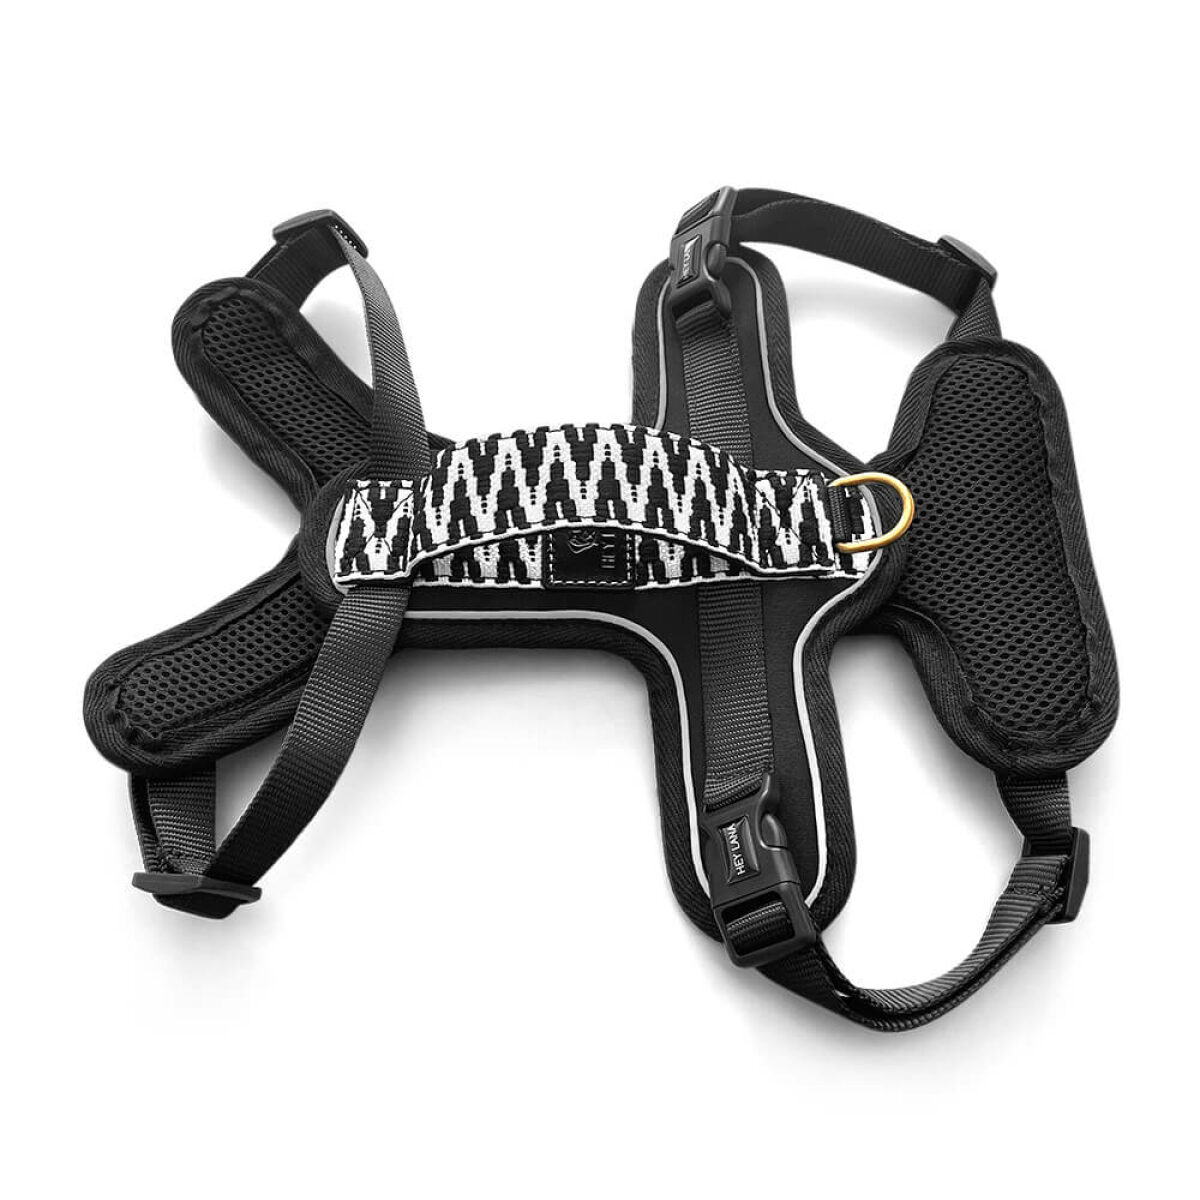 Dog with premium dog harness Padded in black/white at the back